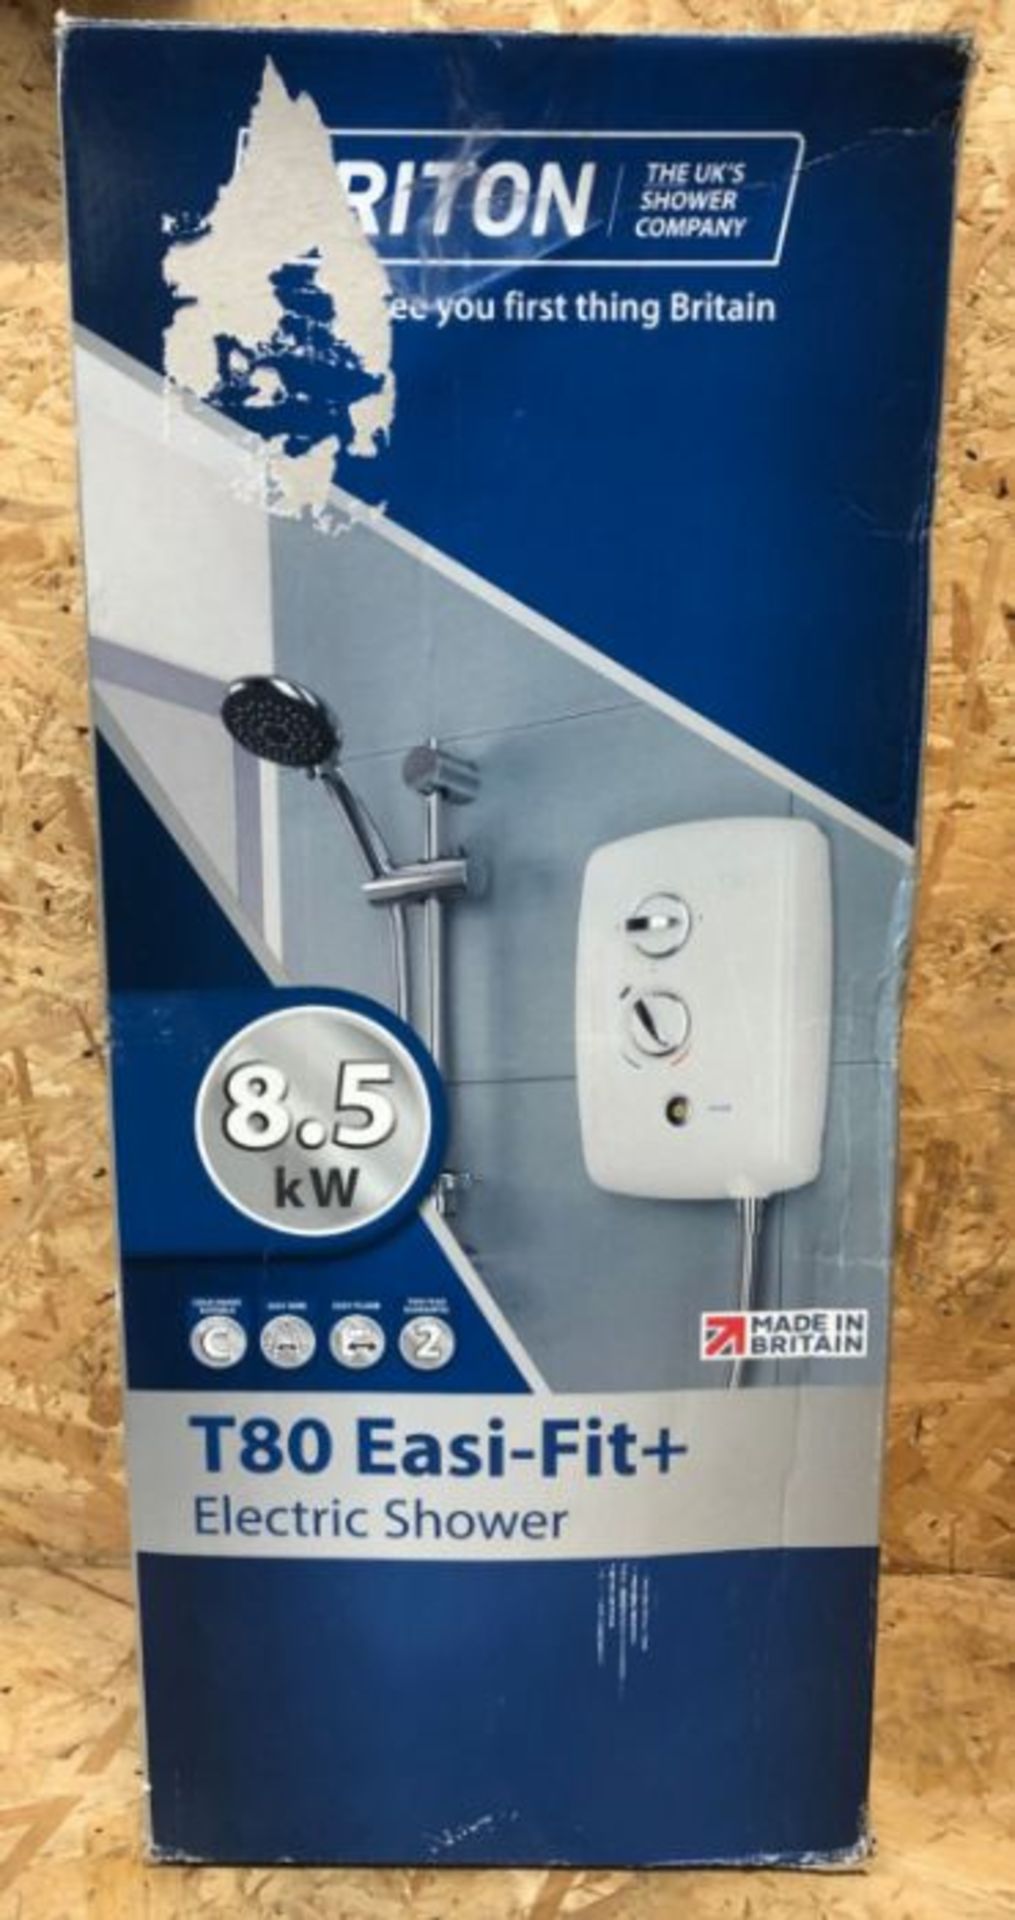 2 X TRITON T80 EASI-FIT+ WHITE ELECTRIC SHOWERS, 8.5KW / COMBINED RRP £200.00 / UNTESTED CUSTOMER